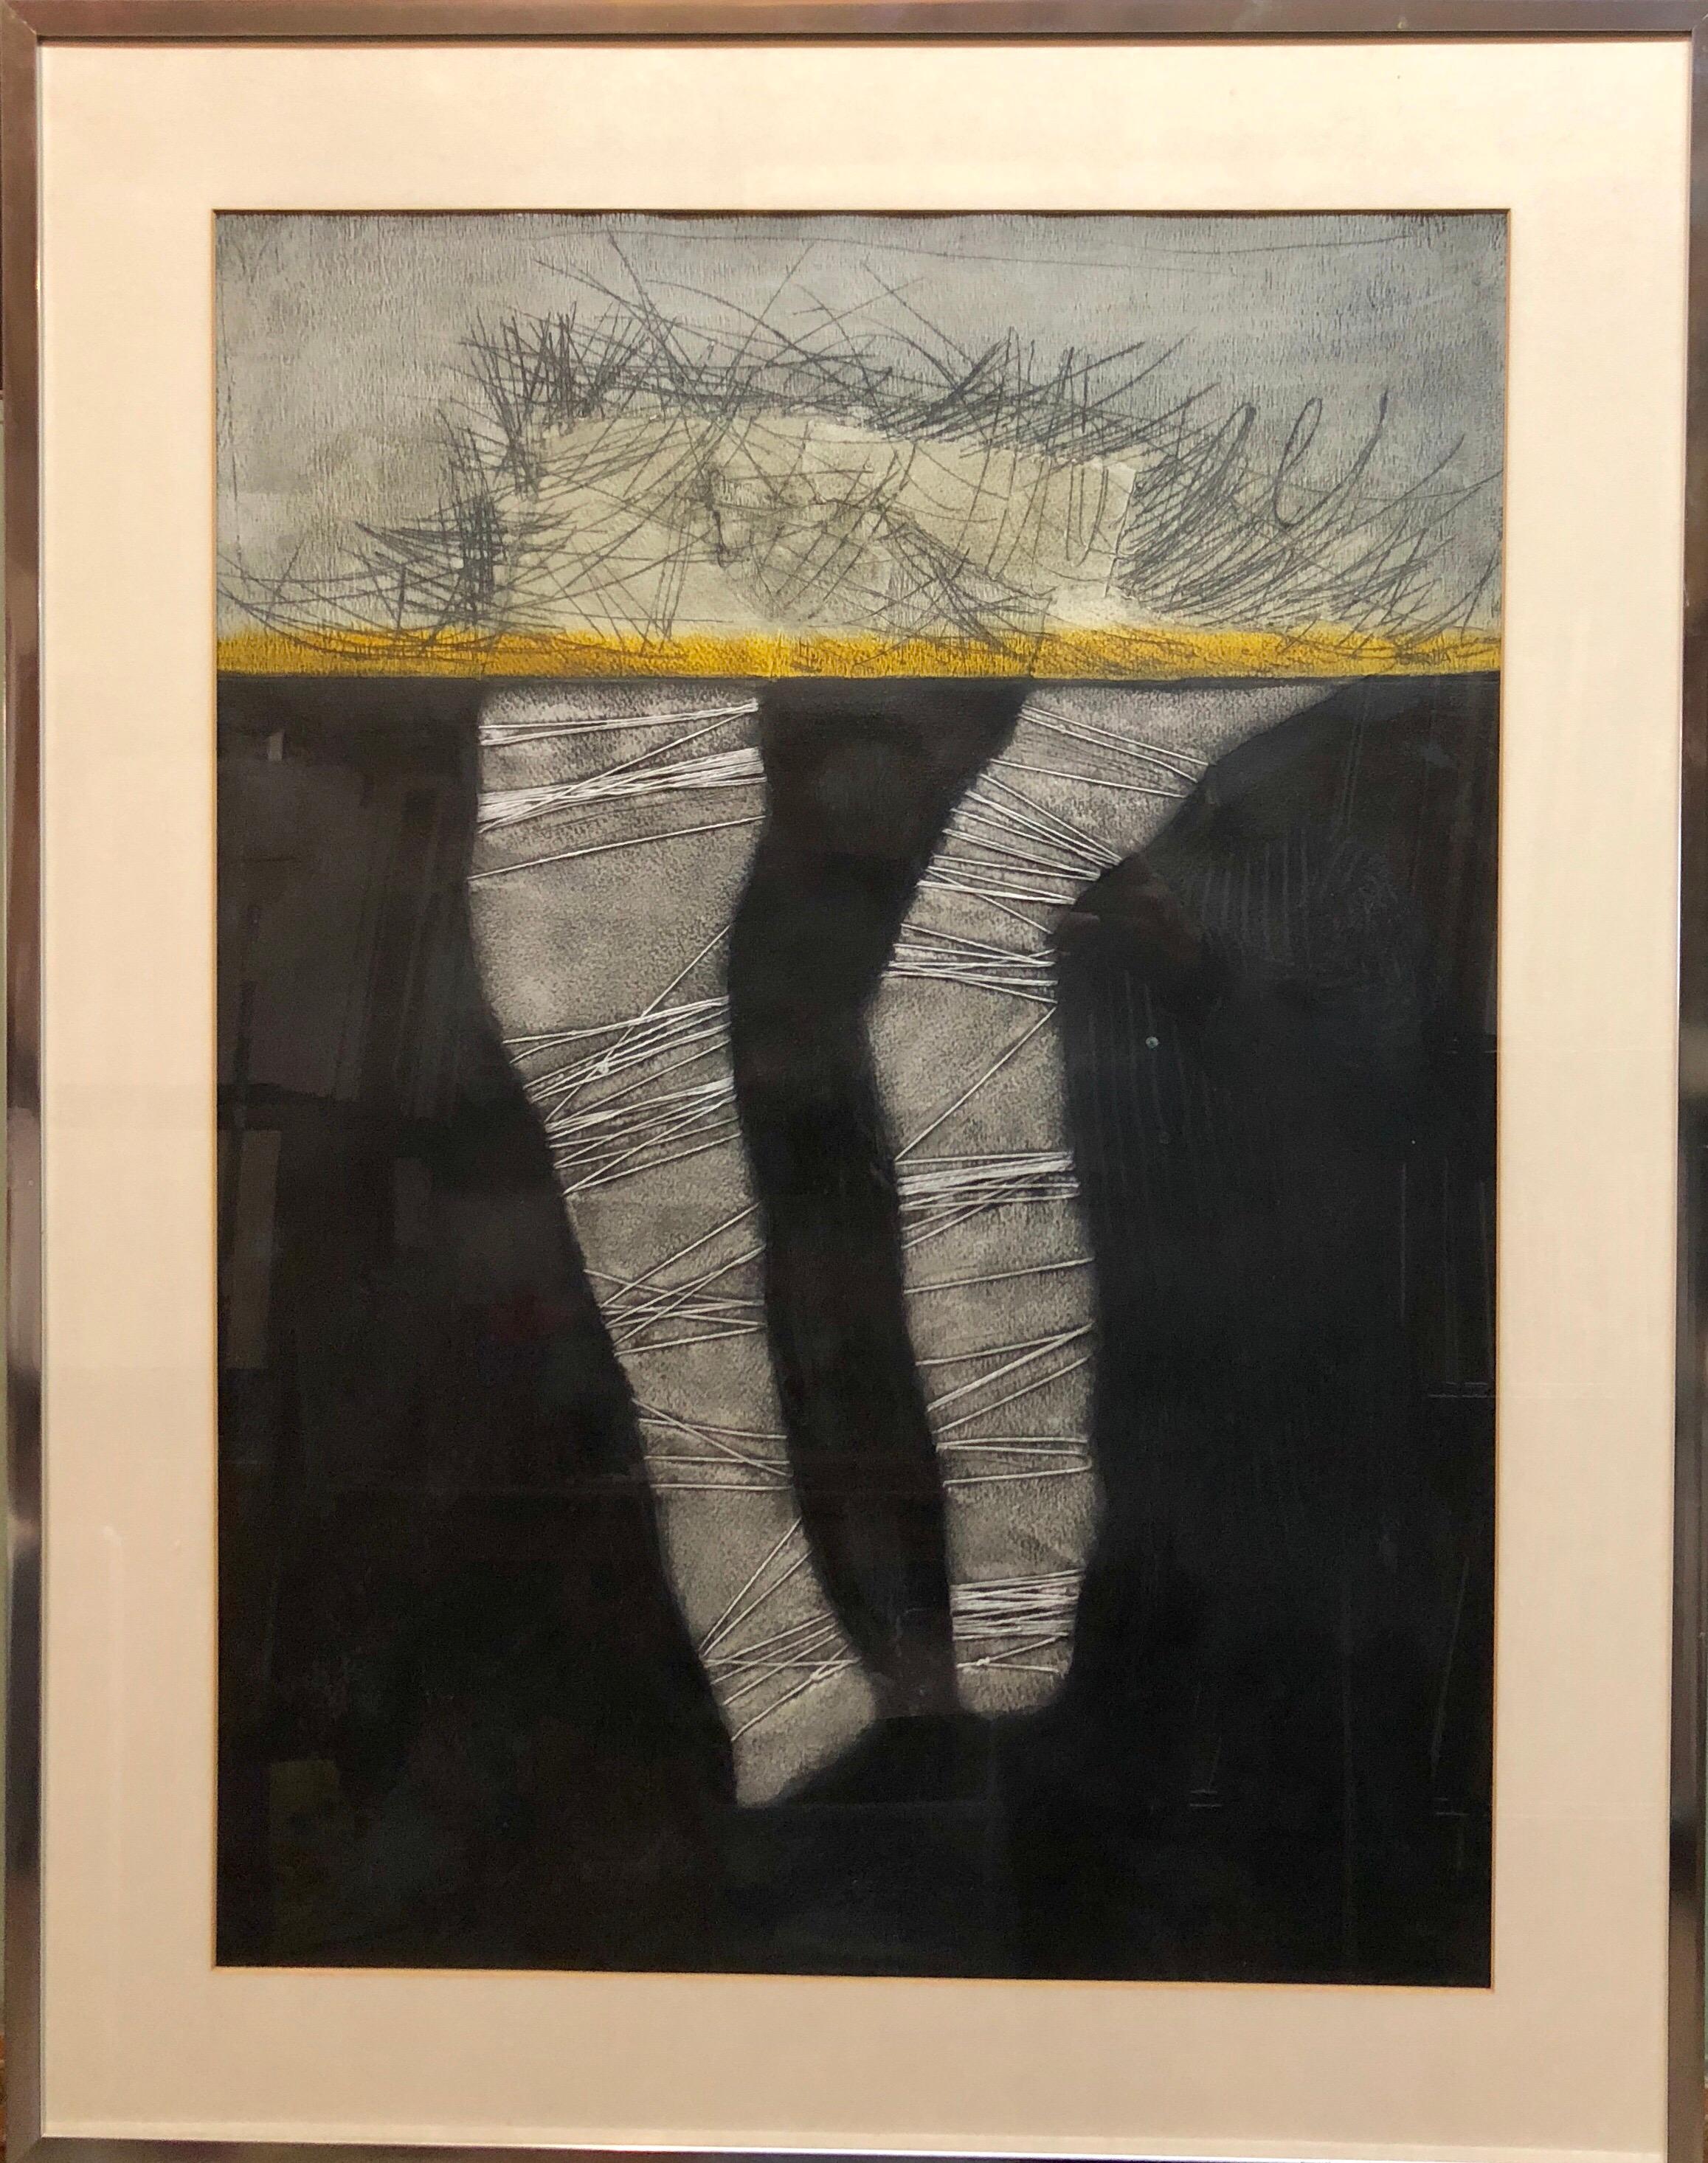 Provenance: Virginia Miller Galleries.
Ramon Carulla, born in Havana, Cuba in 1936 moved to the United States in 1967. He has exhibited widely throughout the United States, Latin America and Europe. He has participated in personal and group